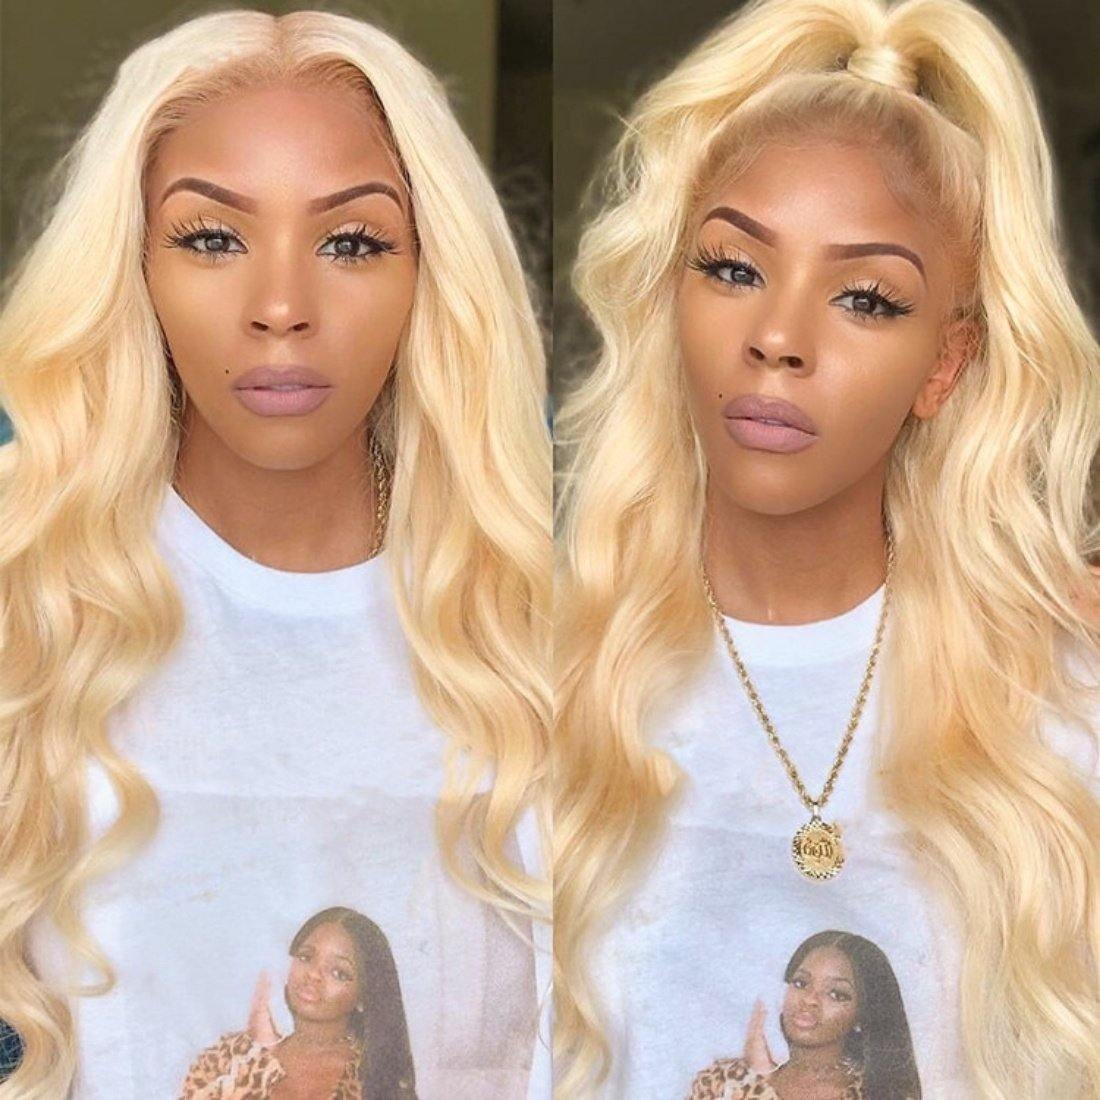 13x4 Lace Frontal Wig 613 Natural Body Wave Brazilian Human Hair Lace Wig - Seyna Hair